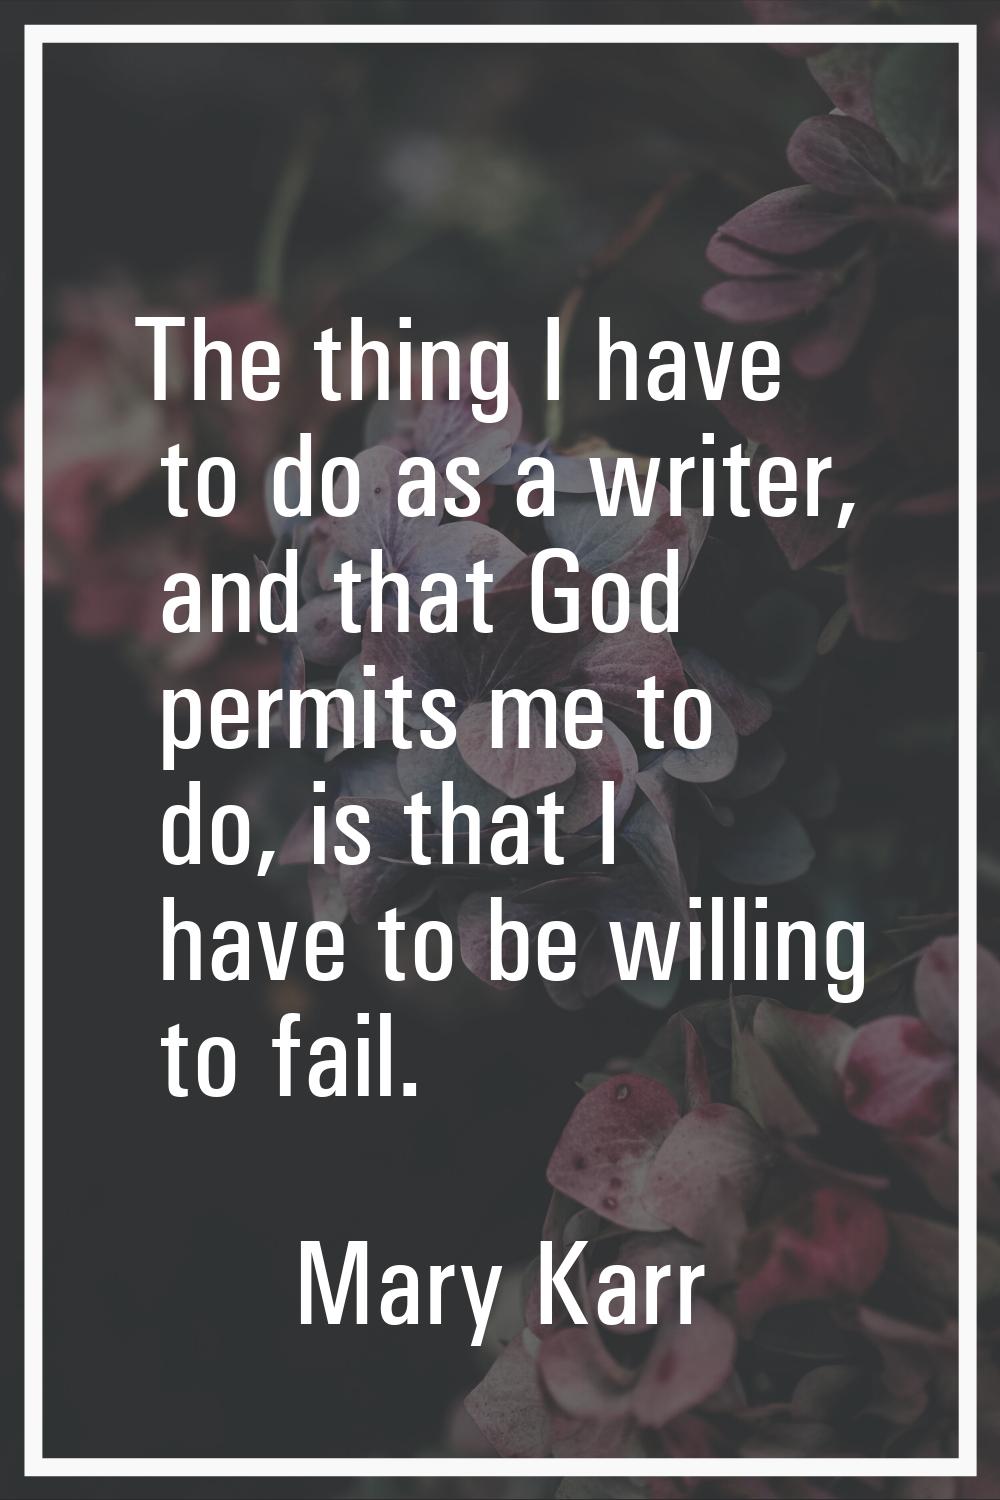 The thing I have to do as a writer, and that God permits me to do, is that I have to be willing to 